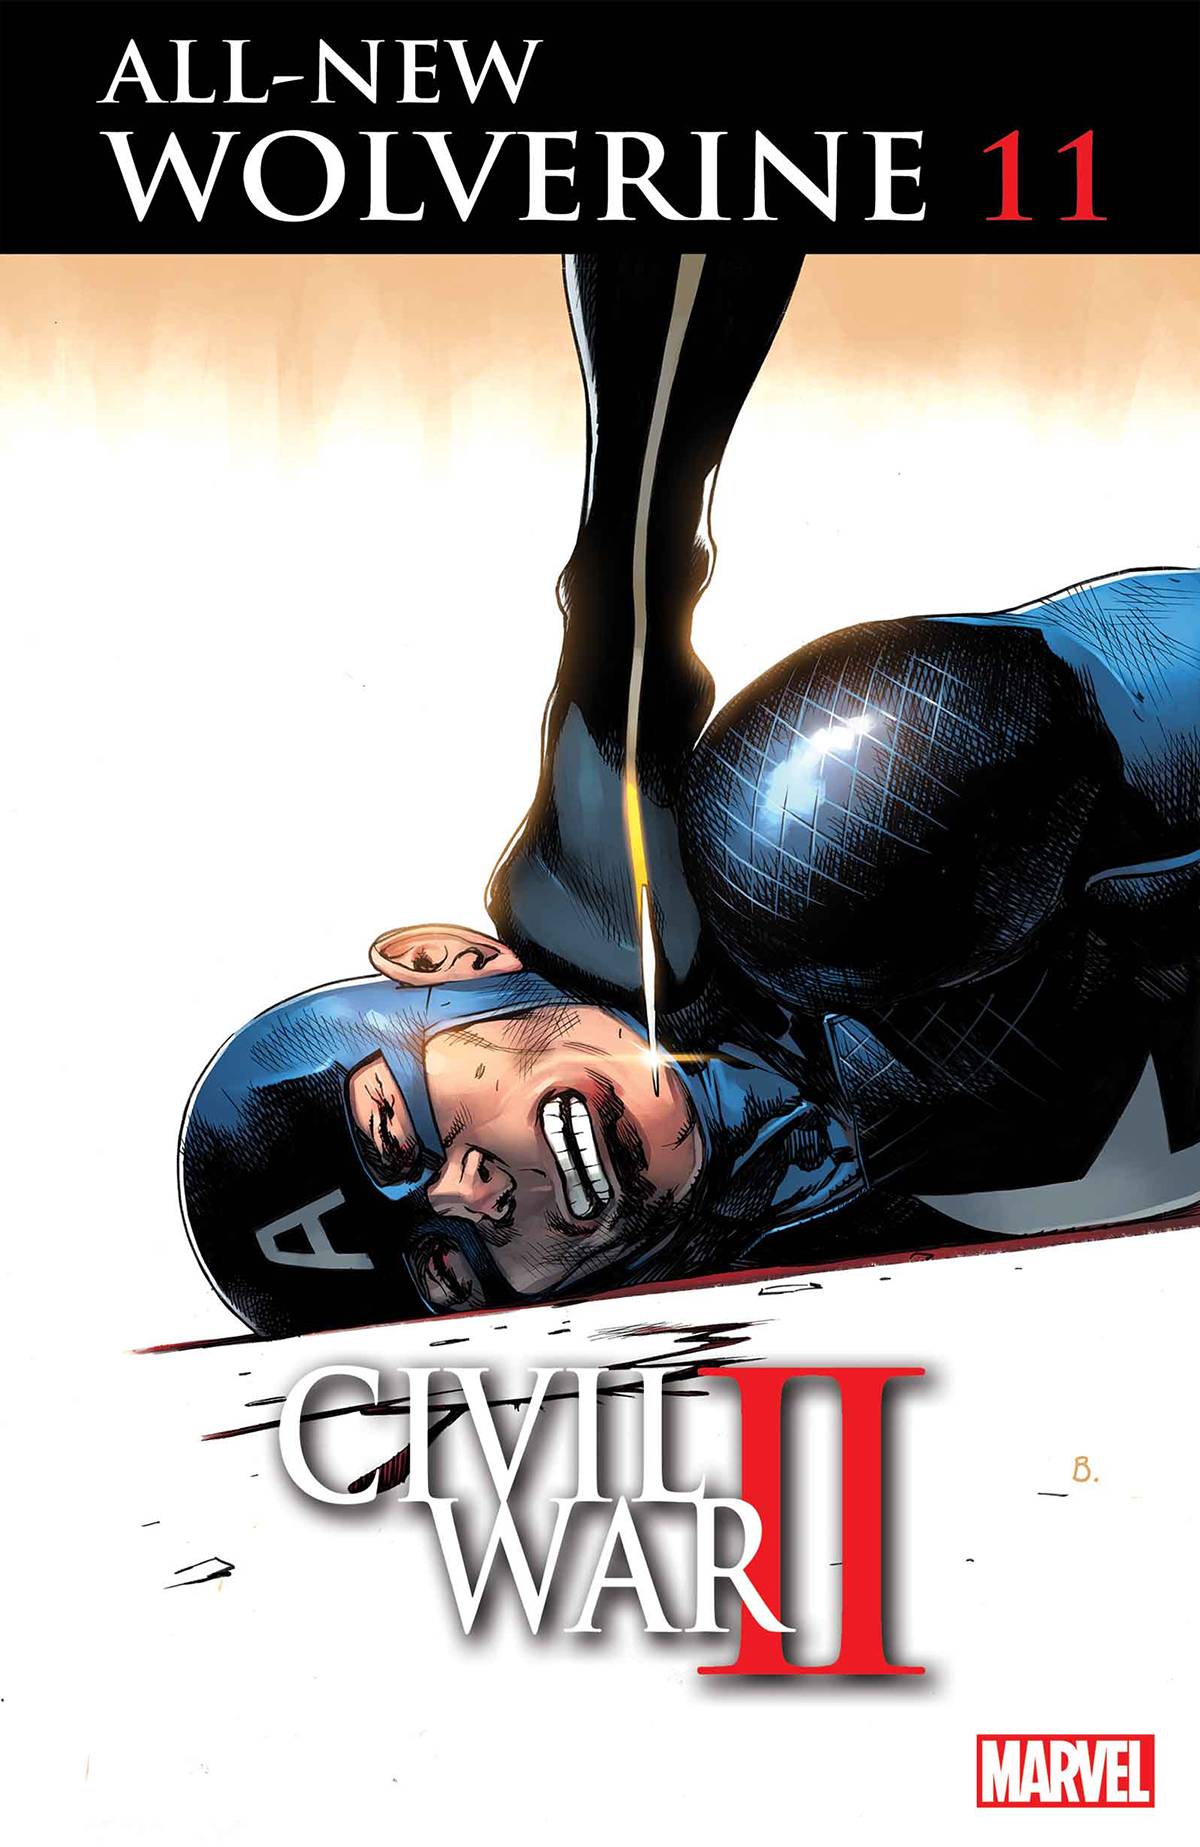 ALL NEW WOLVERINE #11 CW2